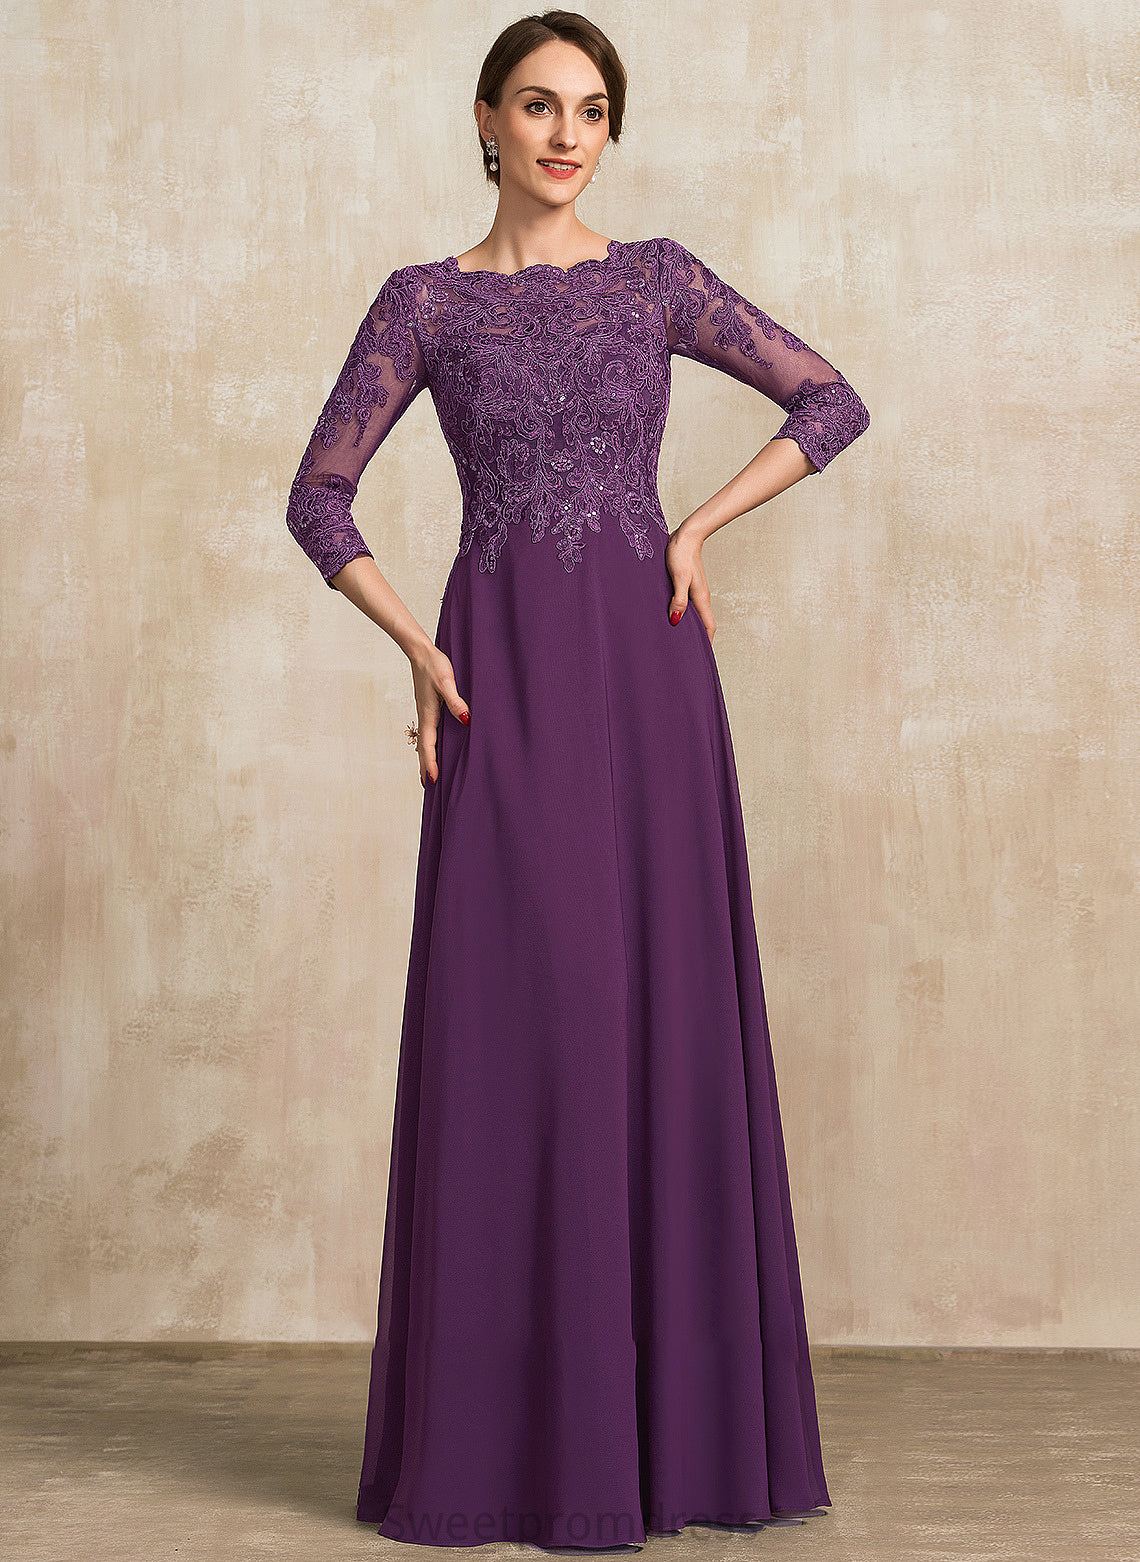 A-Line Floor-Length Mother of the Bride Dresses Bride Lacey Dress Neck Chiffon Scoop Lace the With Sequins of Mother